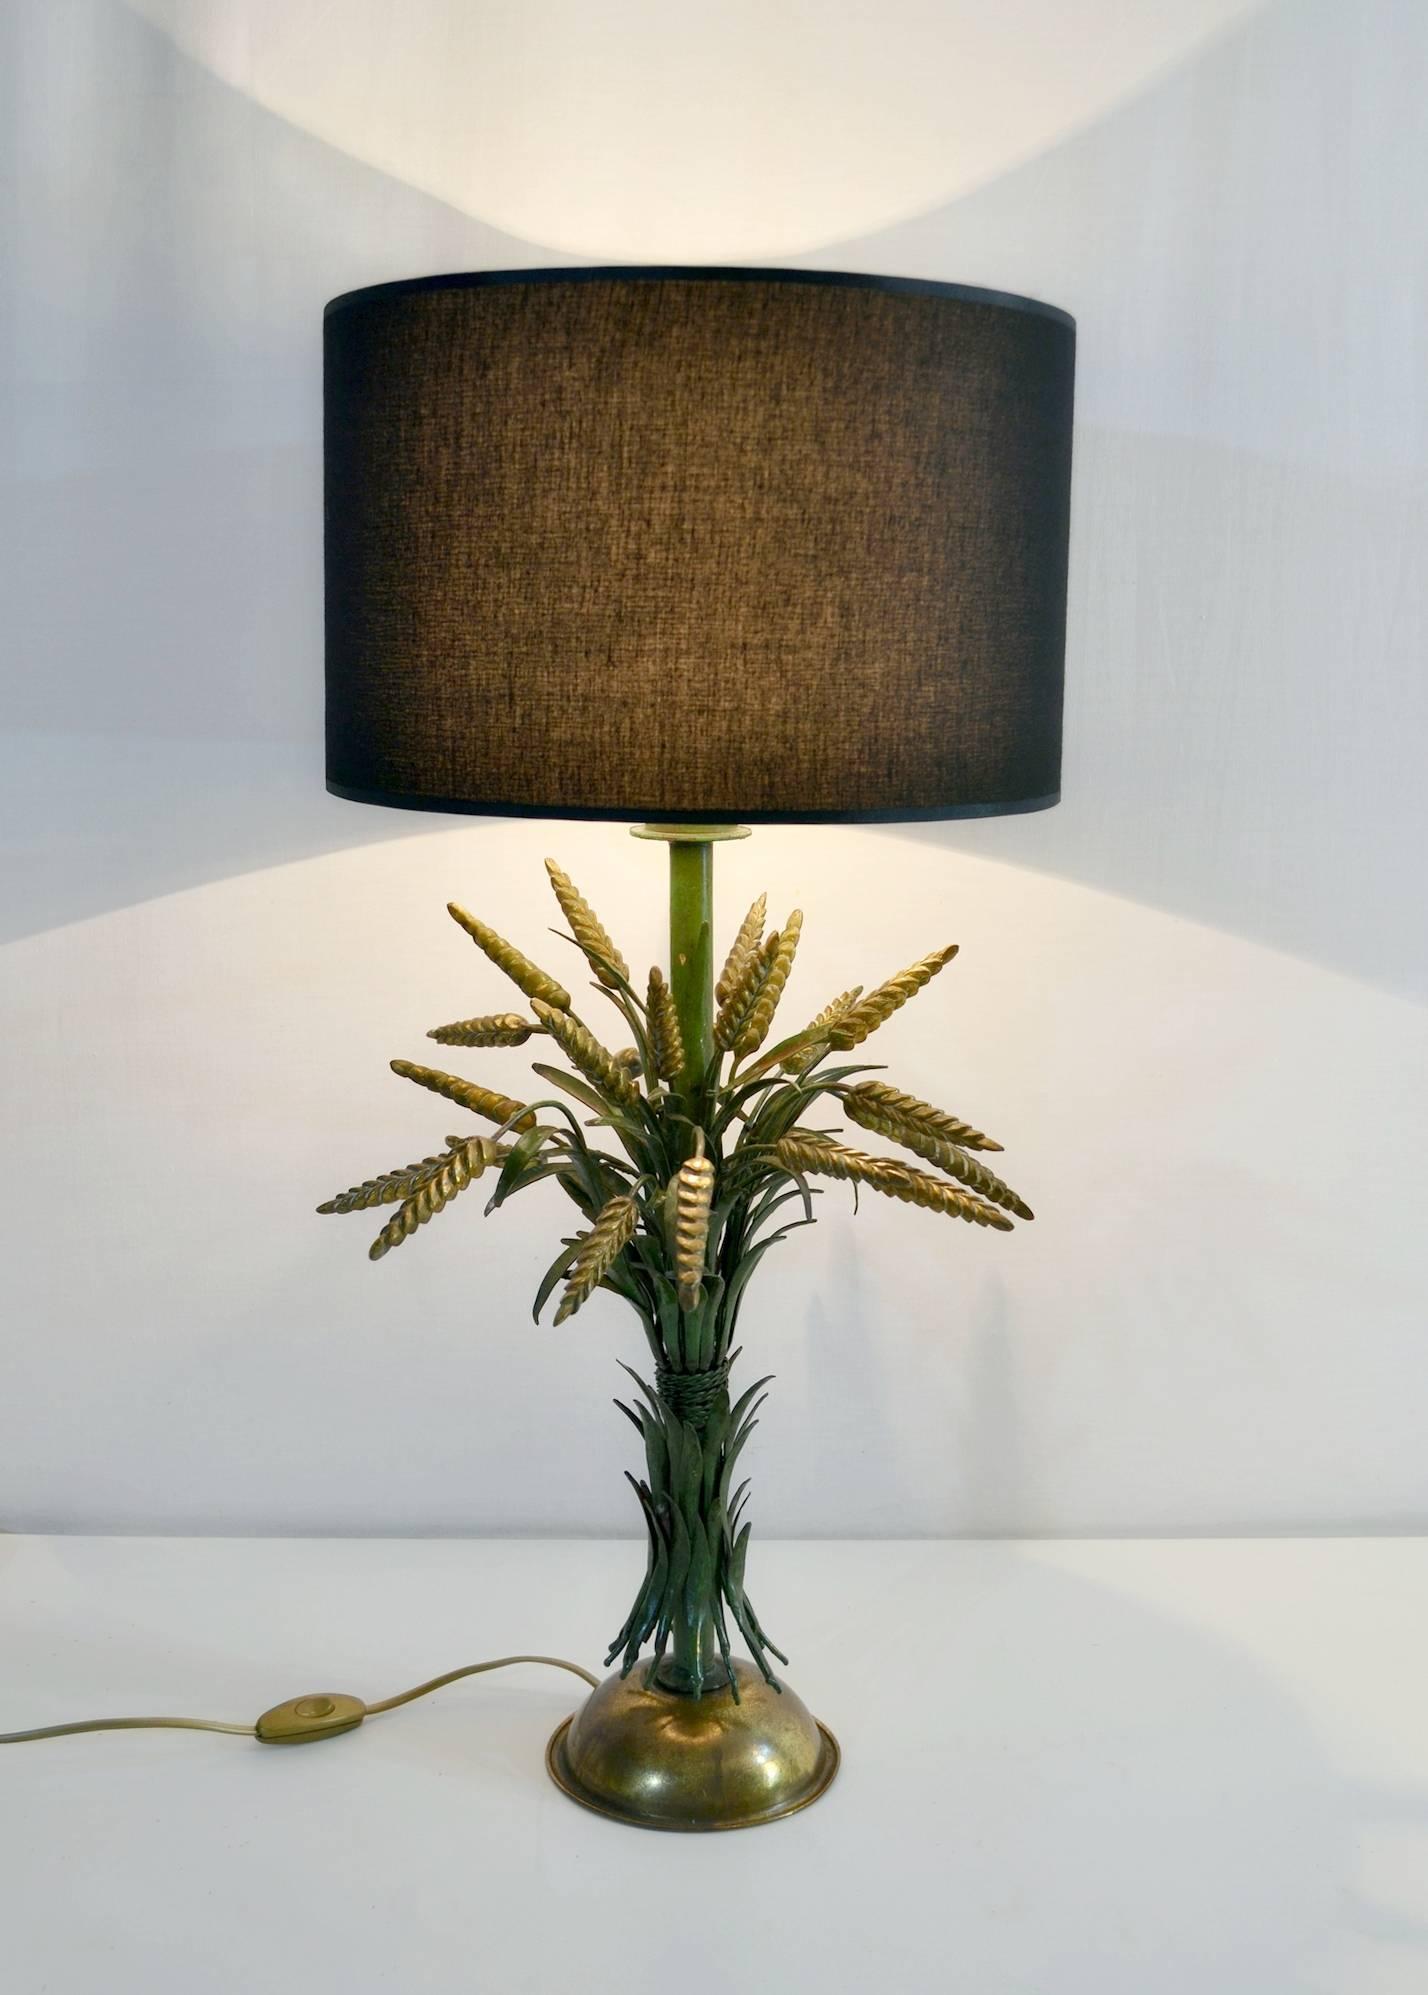 Italian table lamp in form of a wheat sheaf in gold and green with a new drum shade in black fabric.